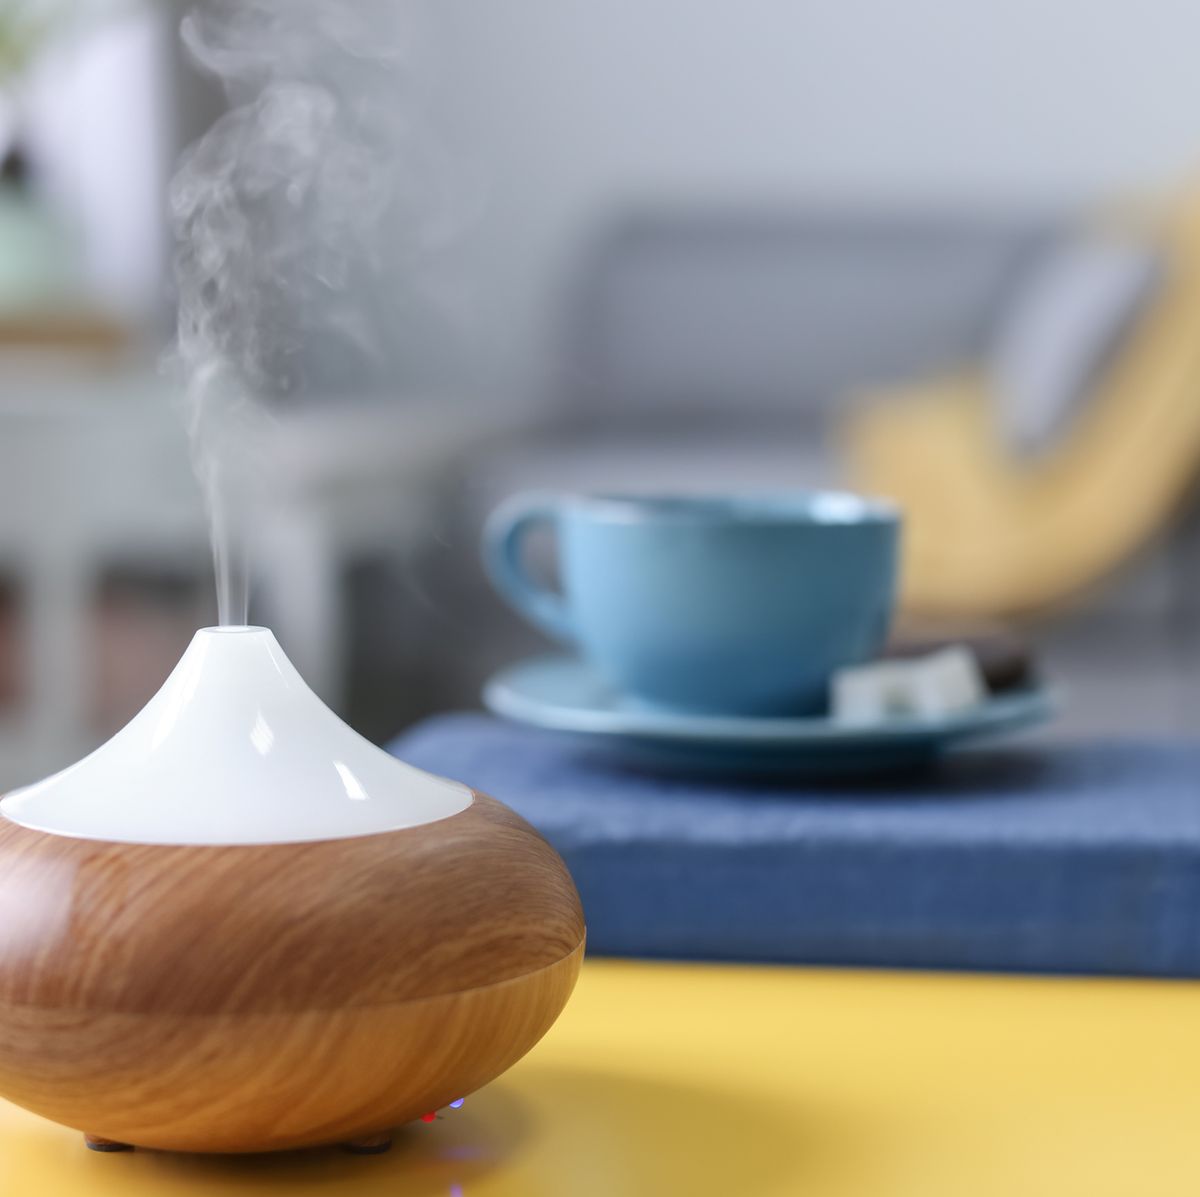 https://hips.hearstapps.com/hmg-prod/images/how-to-clean-humidifier-1575588051.jpg?crop=0.668xw:1.00xh;0.0112xw,0&resize=1200:*